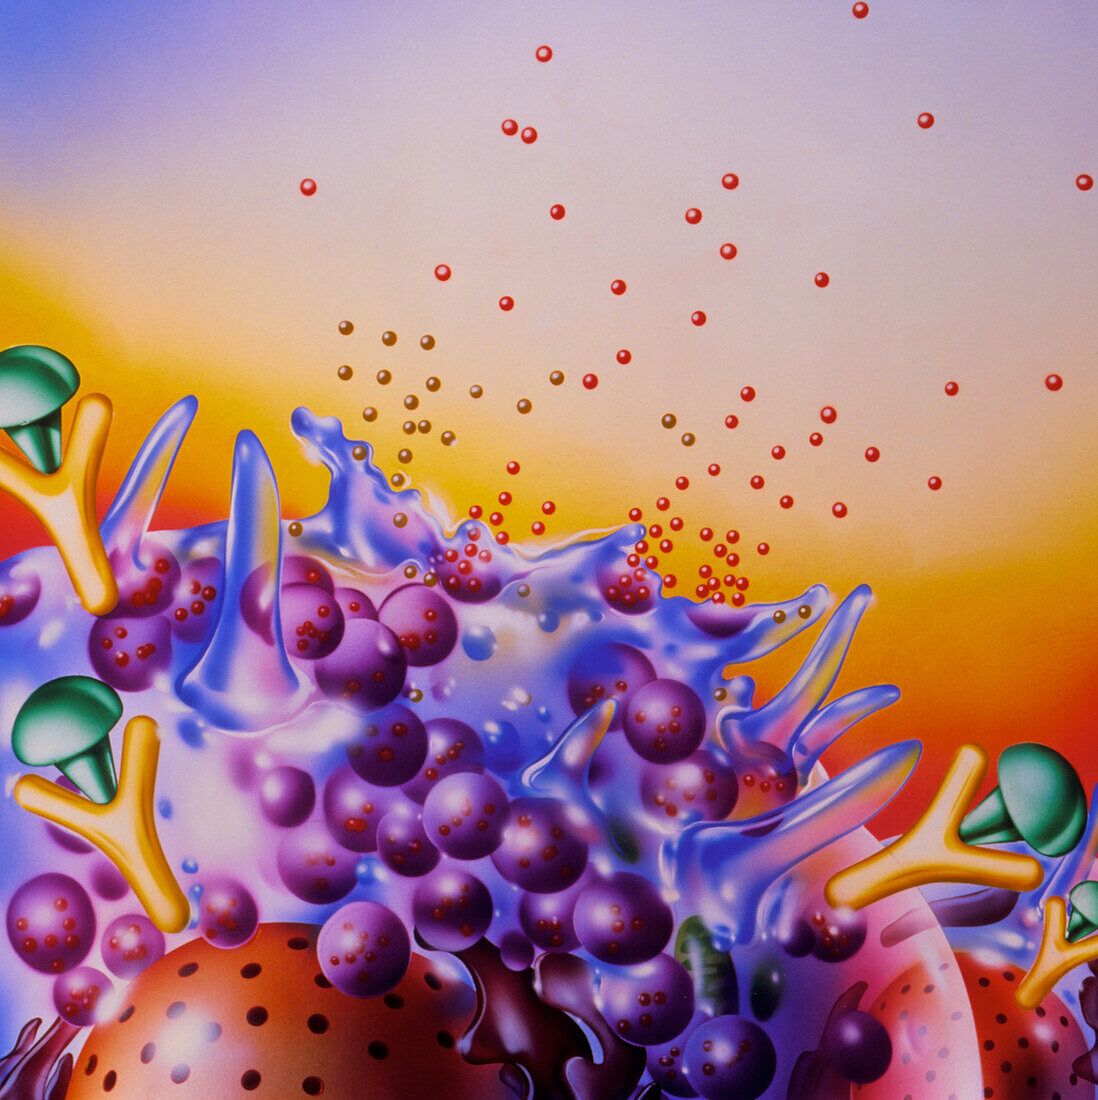 Artwork of mast cells in an allergic response